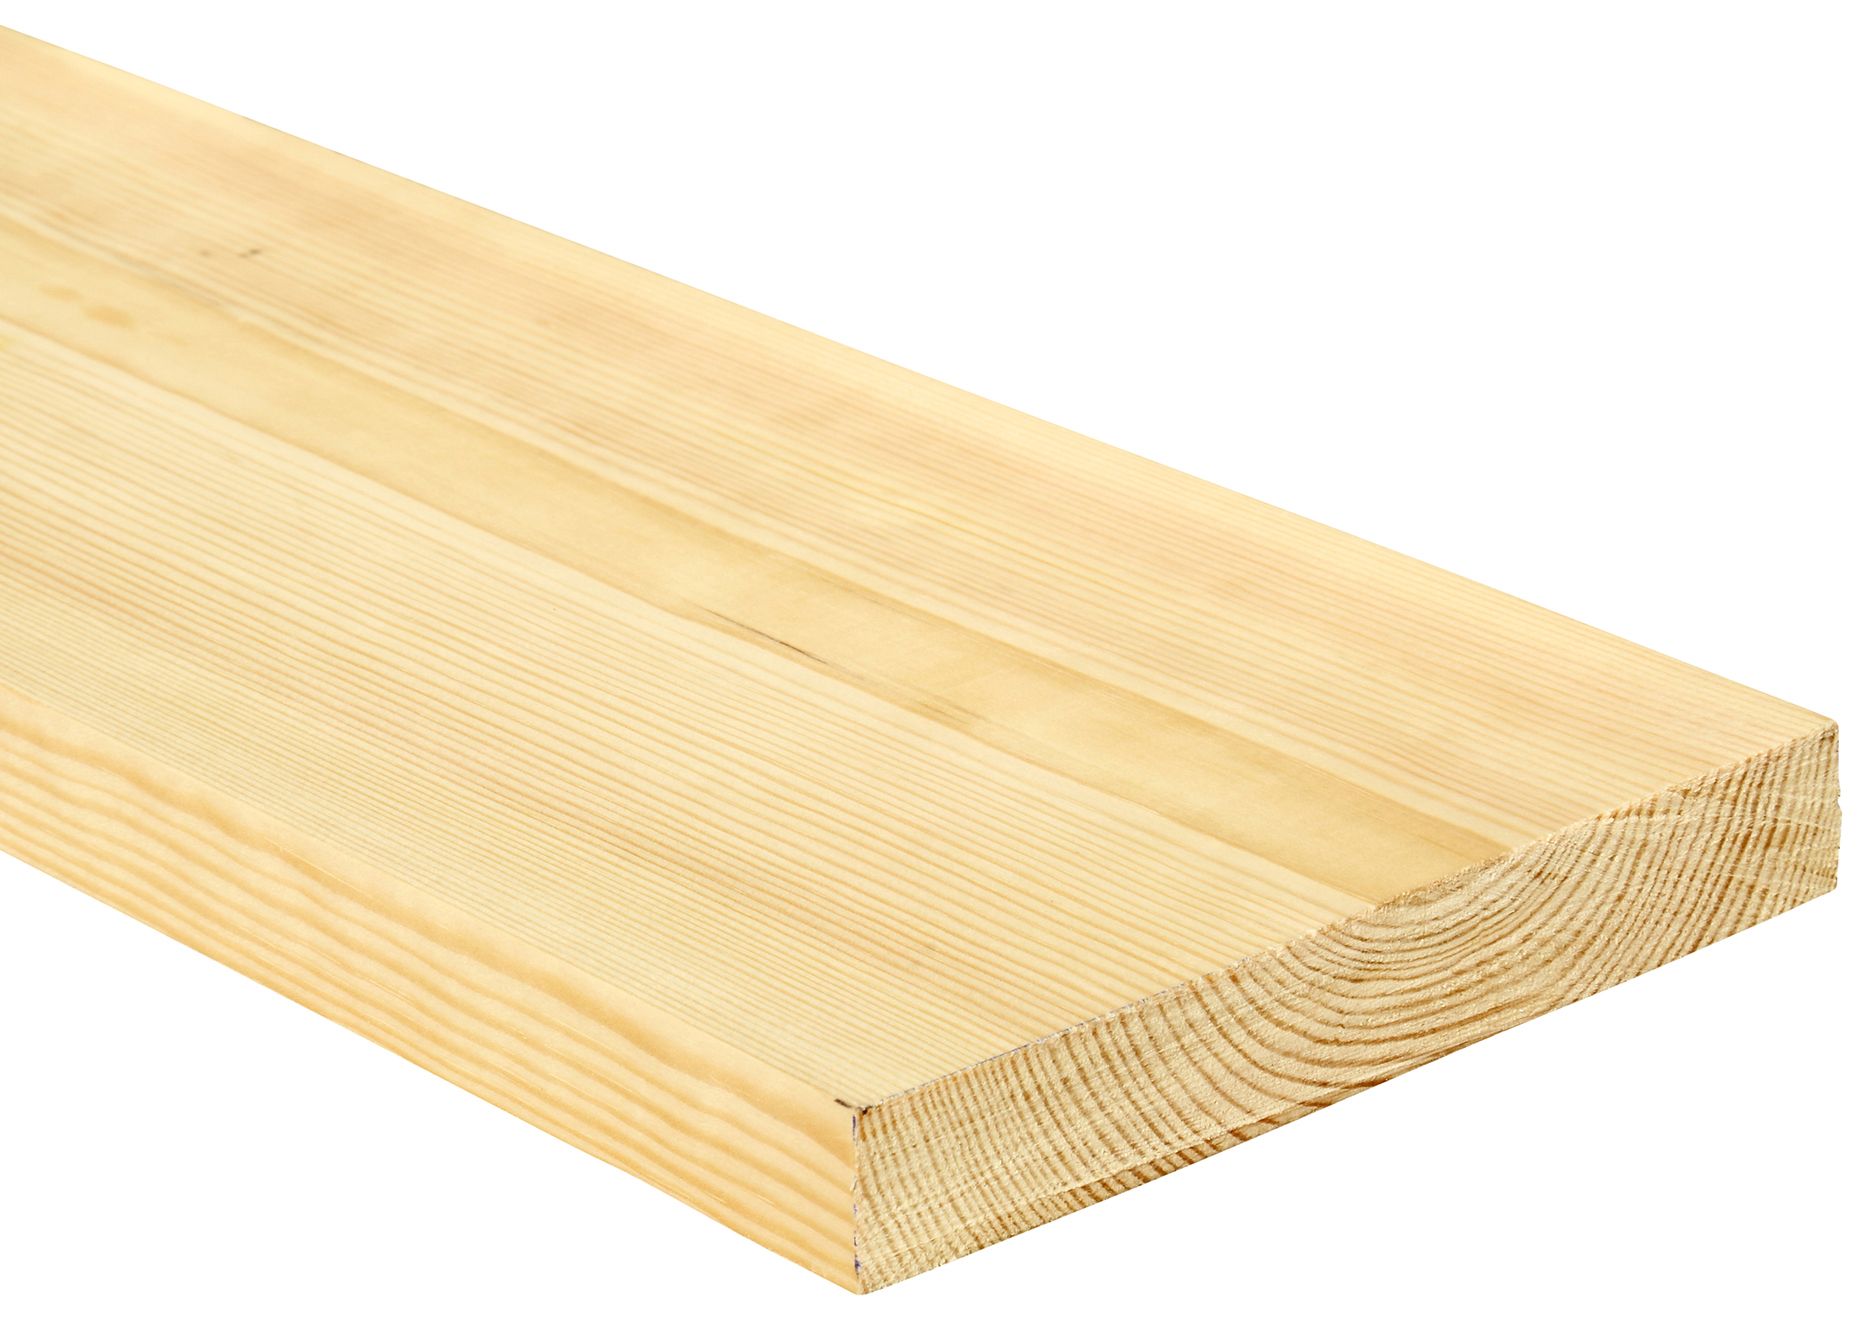 Image of Wickes Redwood PSE Timber - 20.5 x 144 x 2400mm